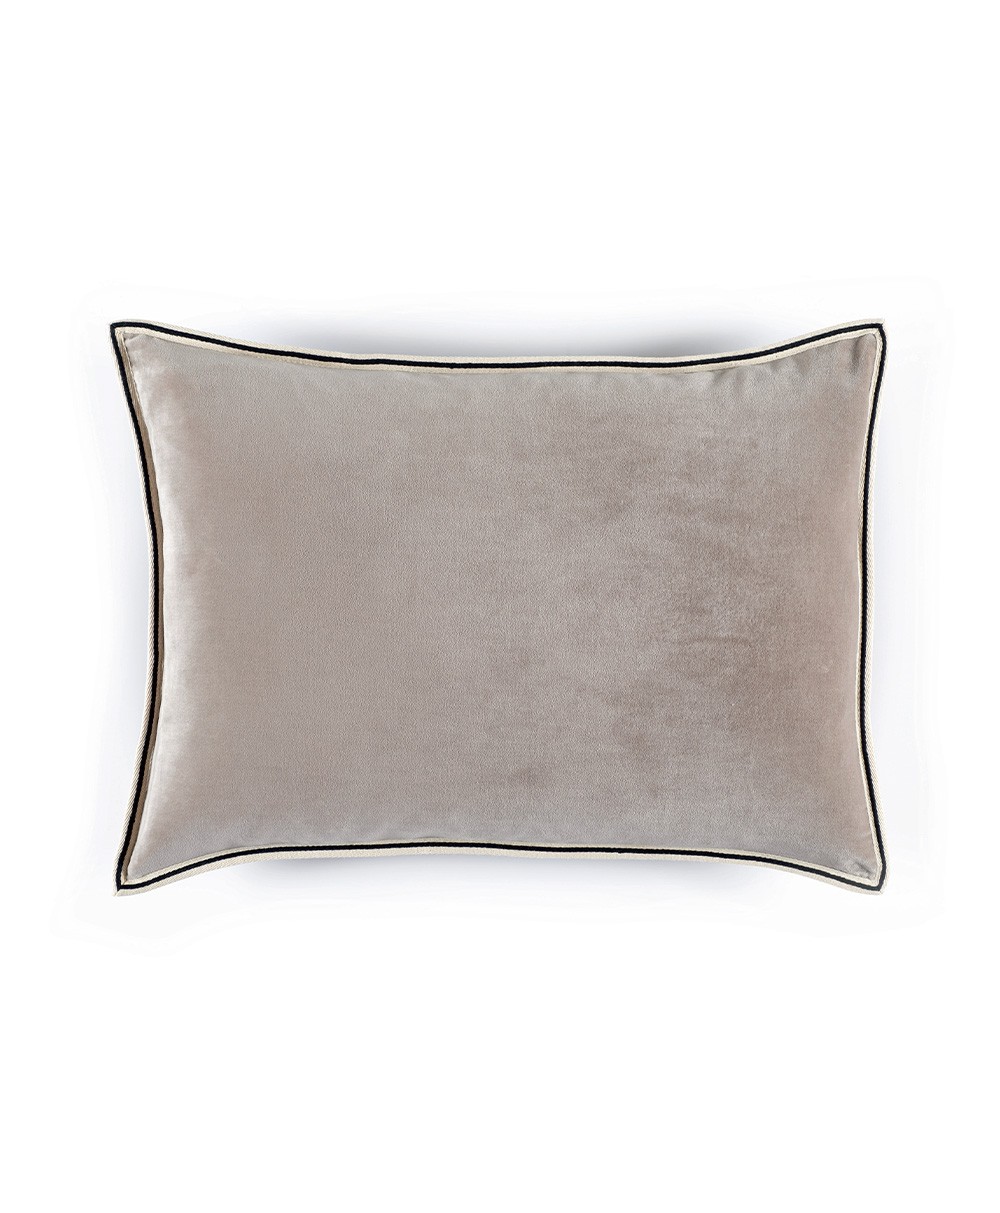 Velvet cushion Aristote with piping finish